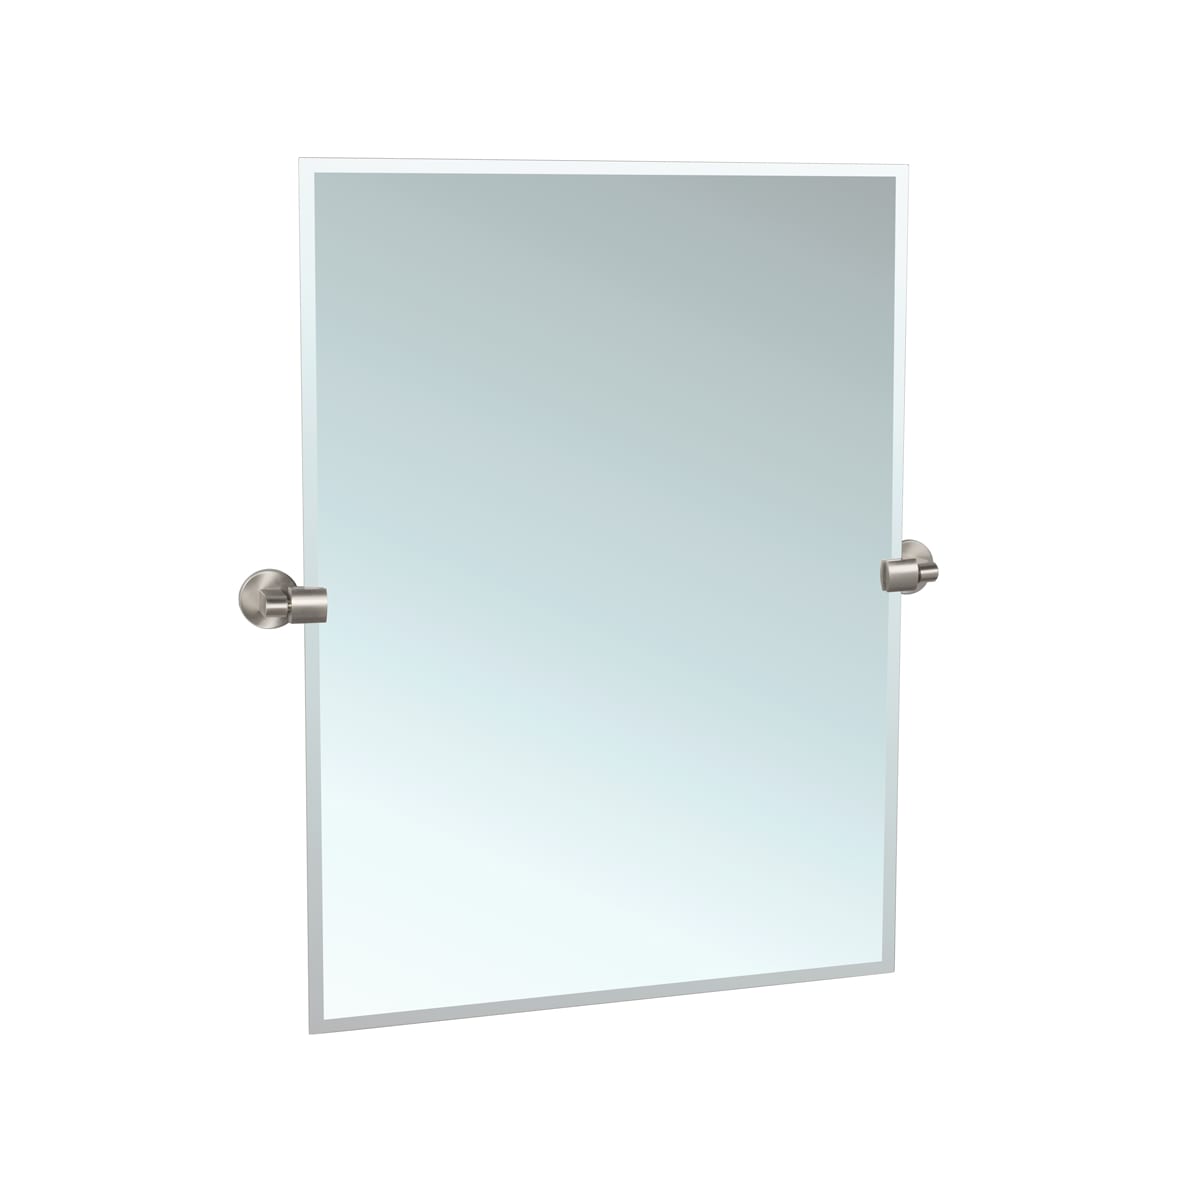 Uttermost 19580 22-Inch by 28-Inch Frameless Vanity Oval Mirror by Uttermos - 1